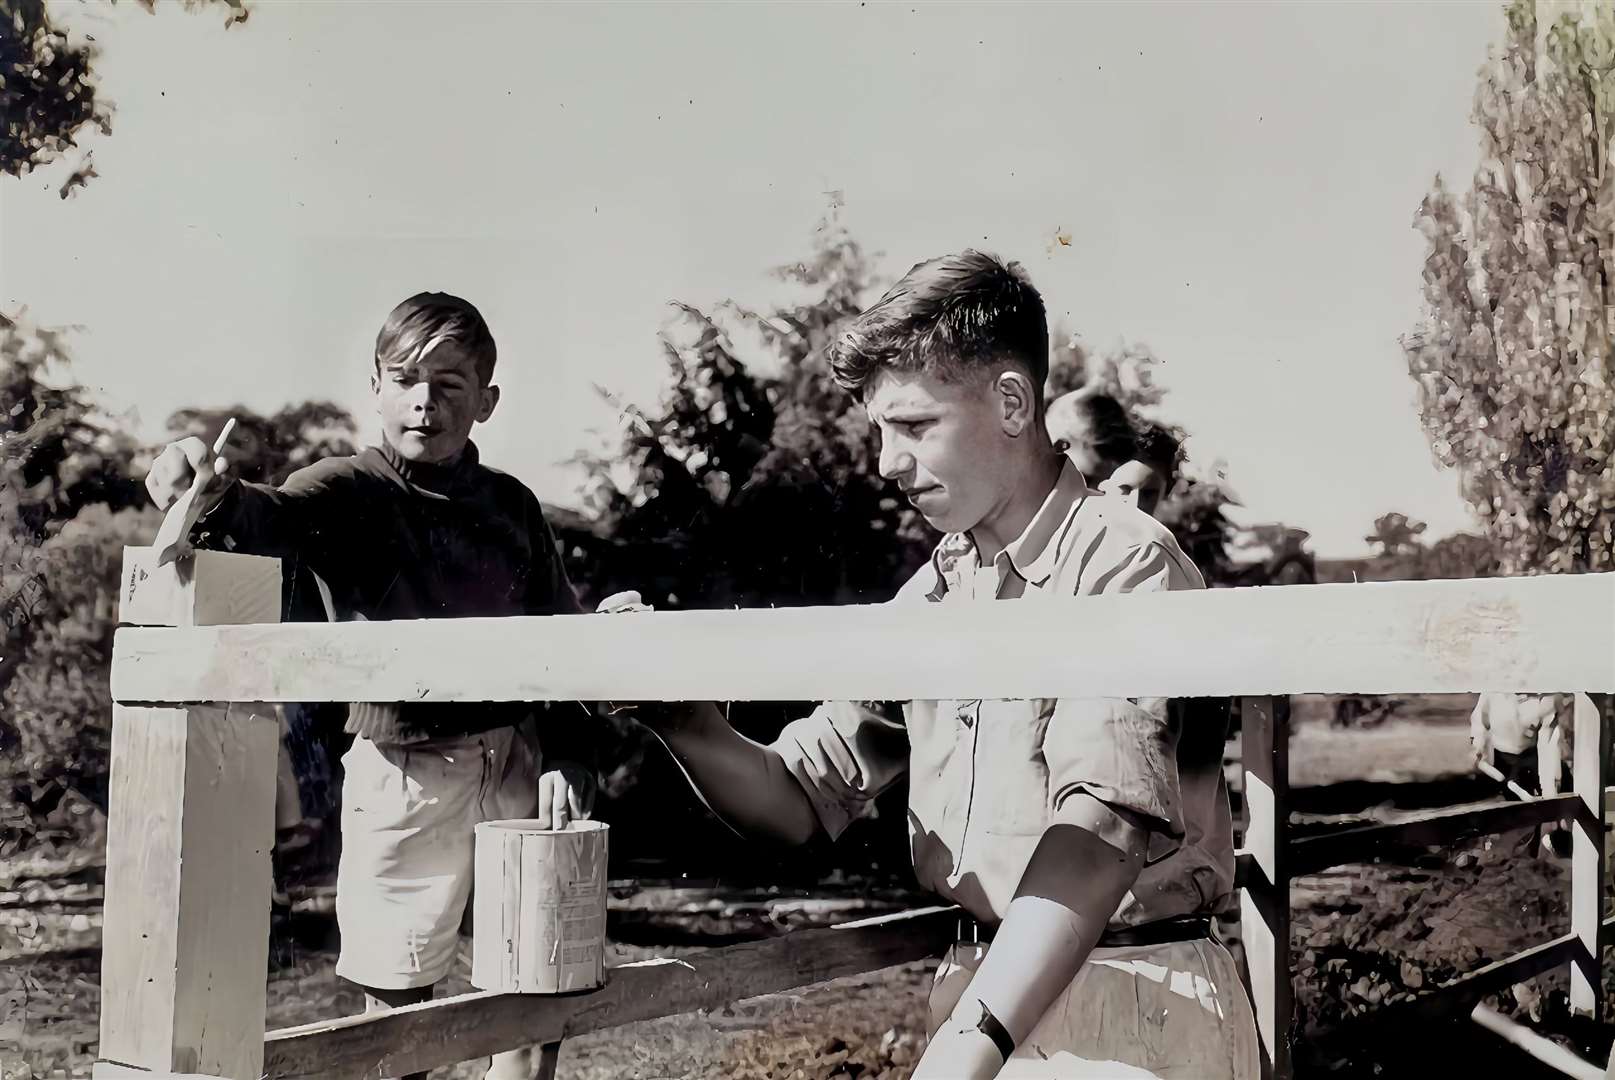 Robert Stephens (left, pictured aged 14 or 15) was eight when he was sent to Australia from Britain as a child migrant. He spent nine years at Fairbridge Farm School outside Molong in rural New South Wales where he suffered sexual and physical abuse in the 1950s (Photo supplied by Robert Stephens/PA)